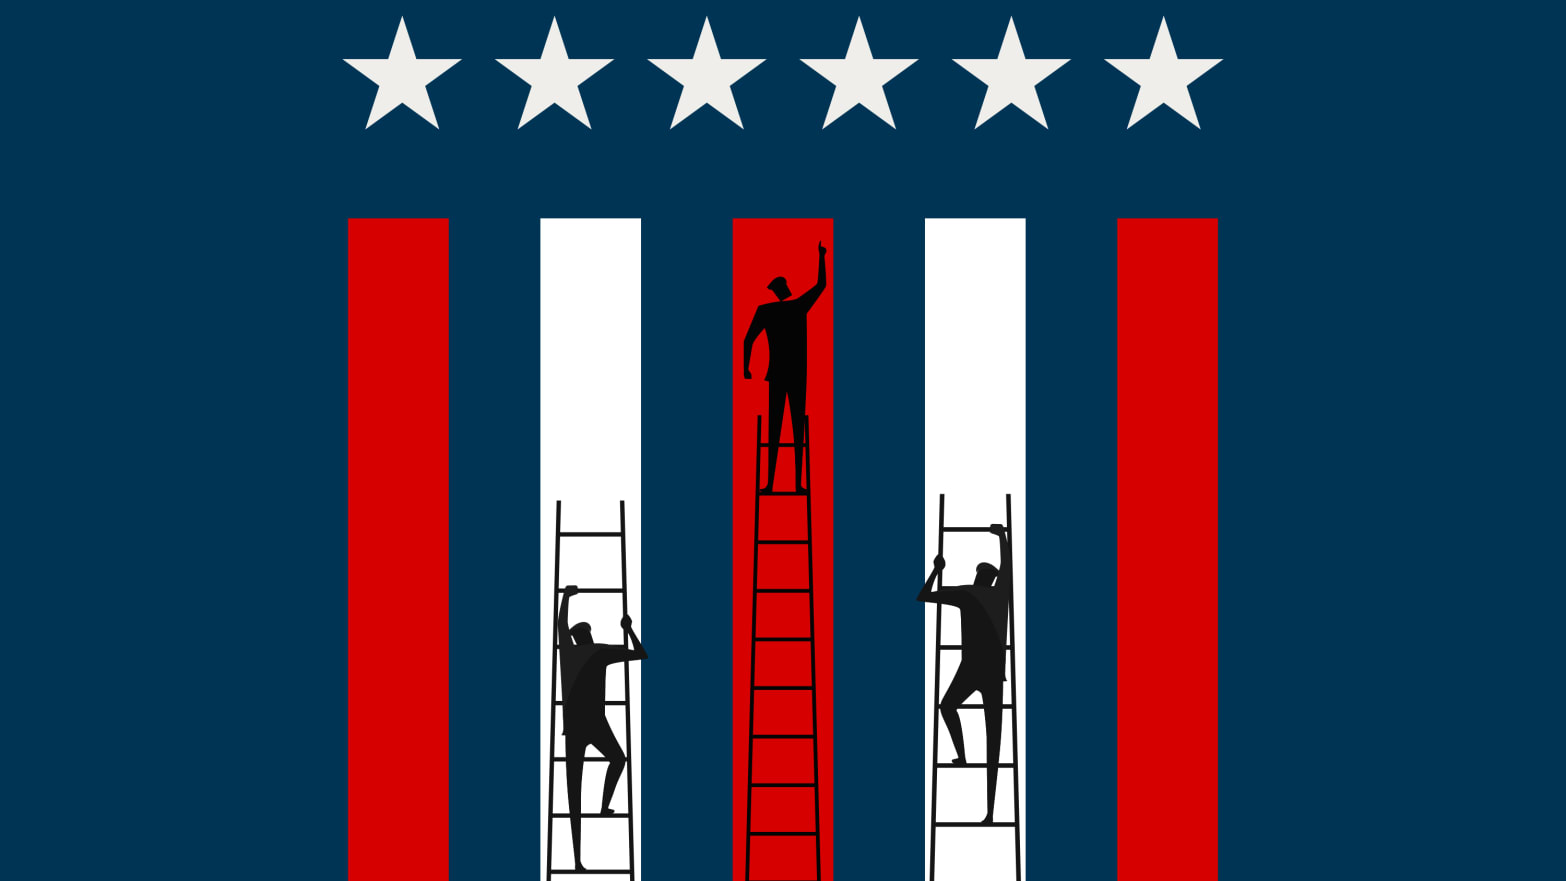 A photo illustration of people on ladders climbing up an American flag.